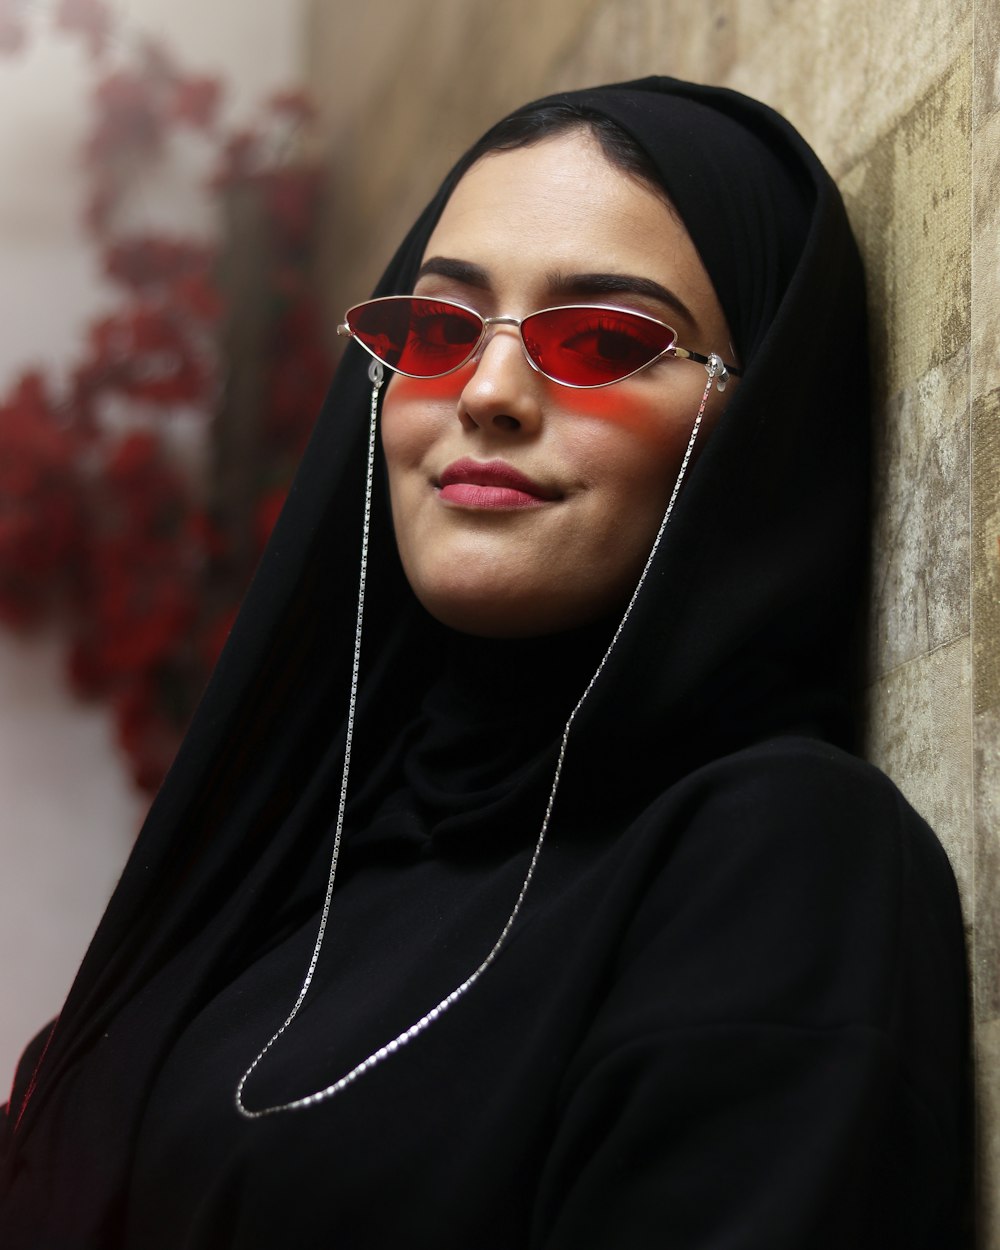 a person wearing a headscarf and sunglasses